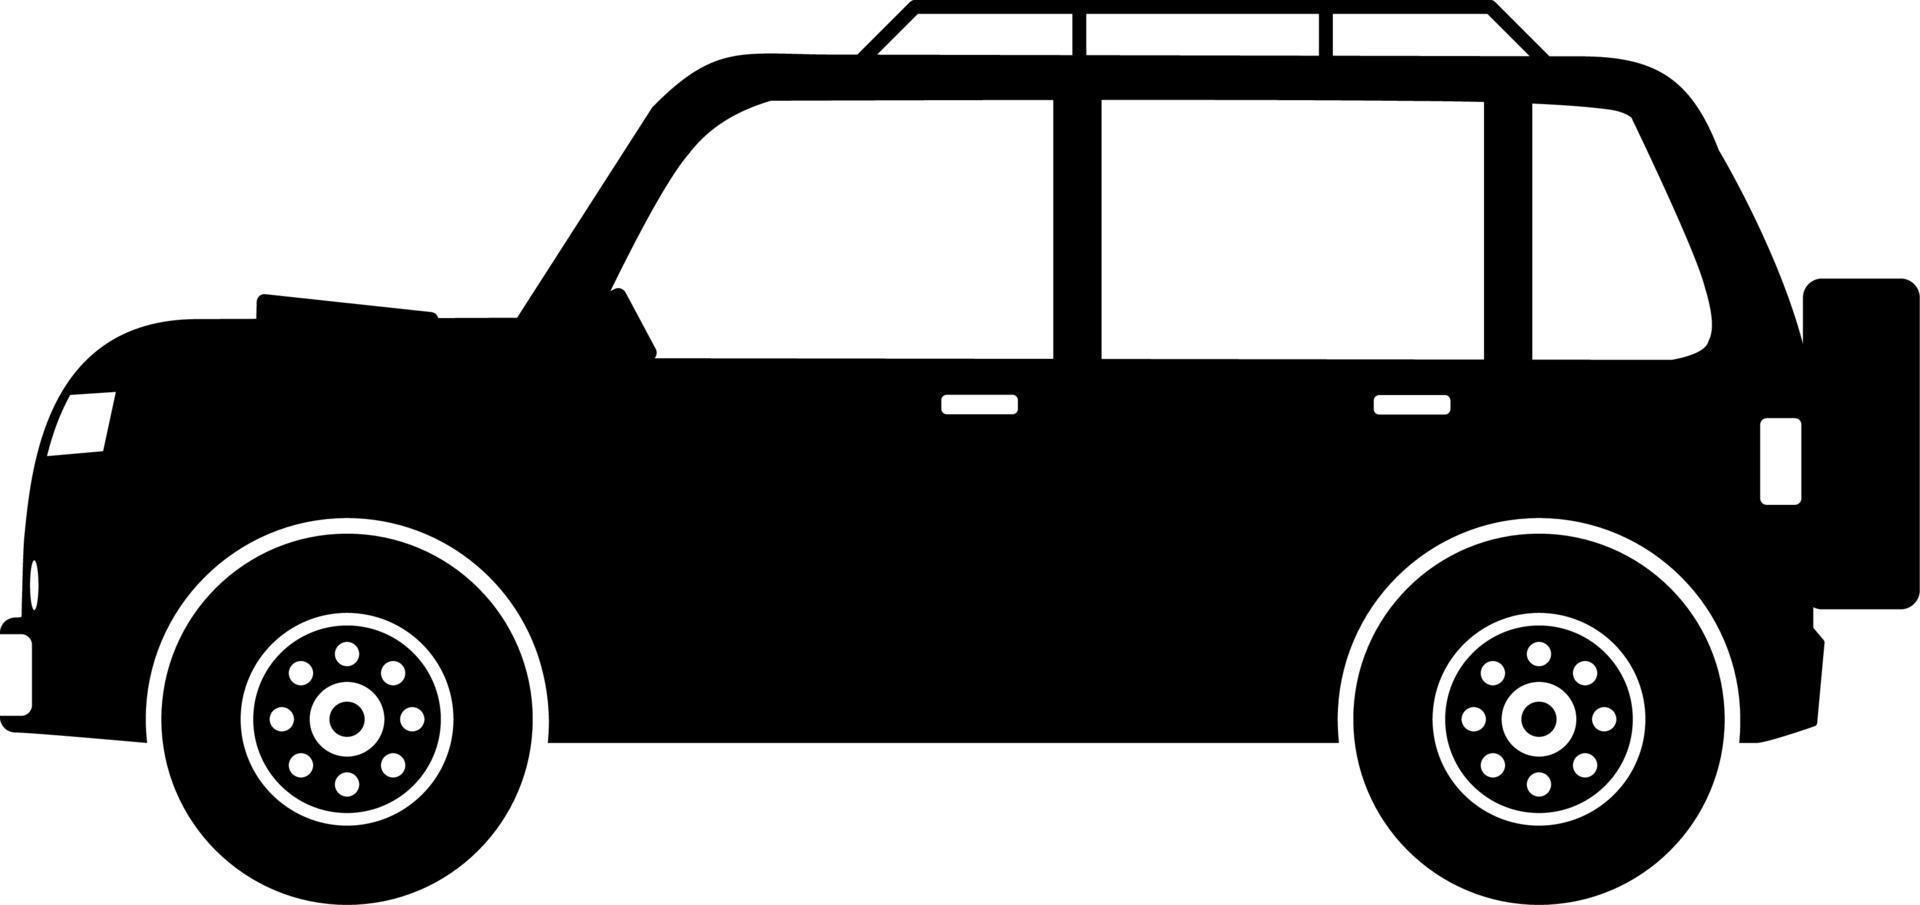 SUV car icon vector. Icon of sport utility vehicle. Vector illustration of SUV car. Vehicle icon of car for design regarding transportation, automotive and automobile. Silhouette of transportation